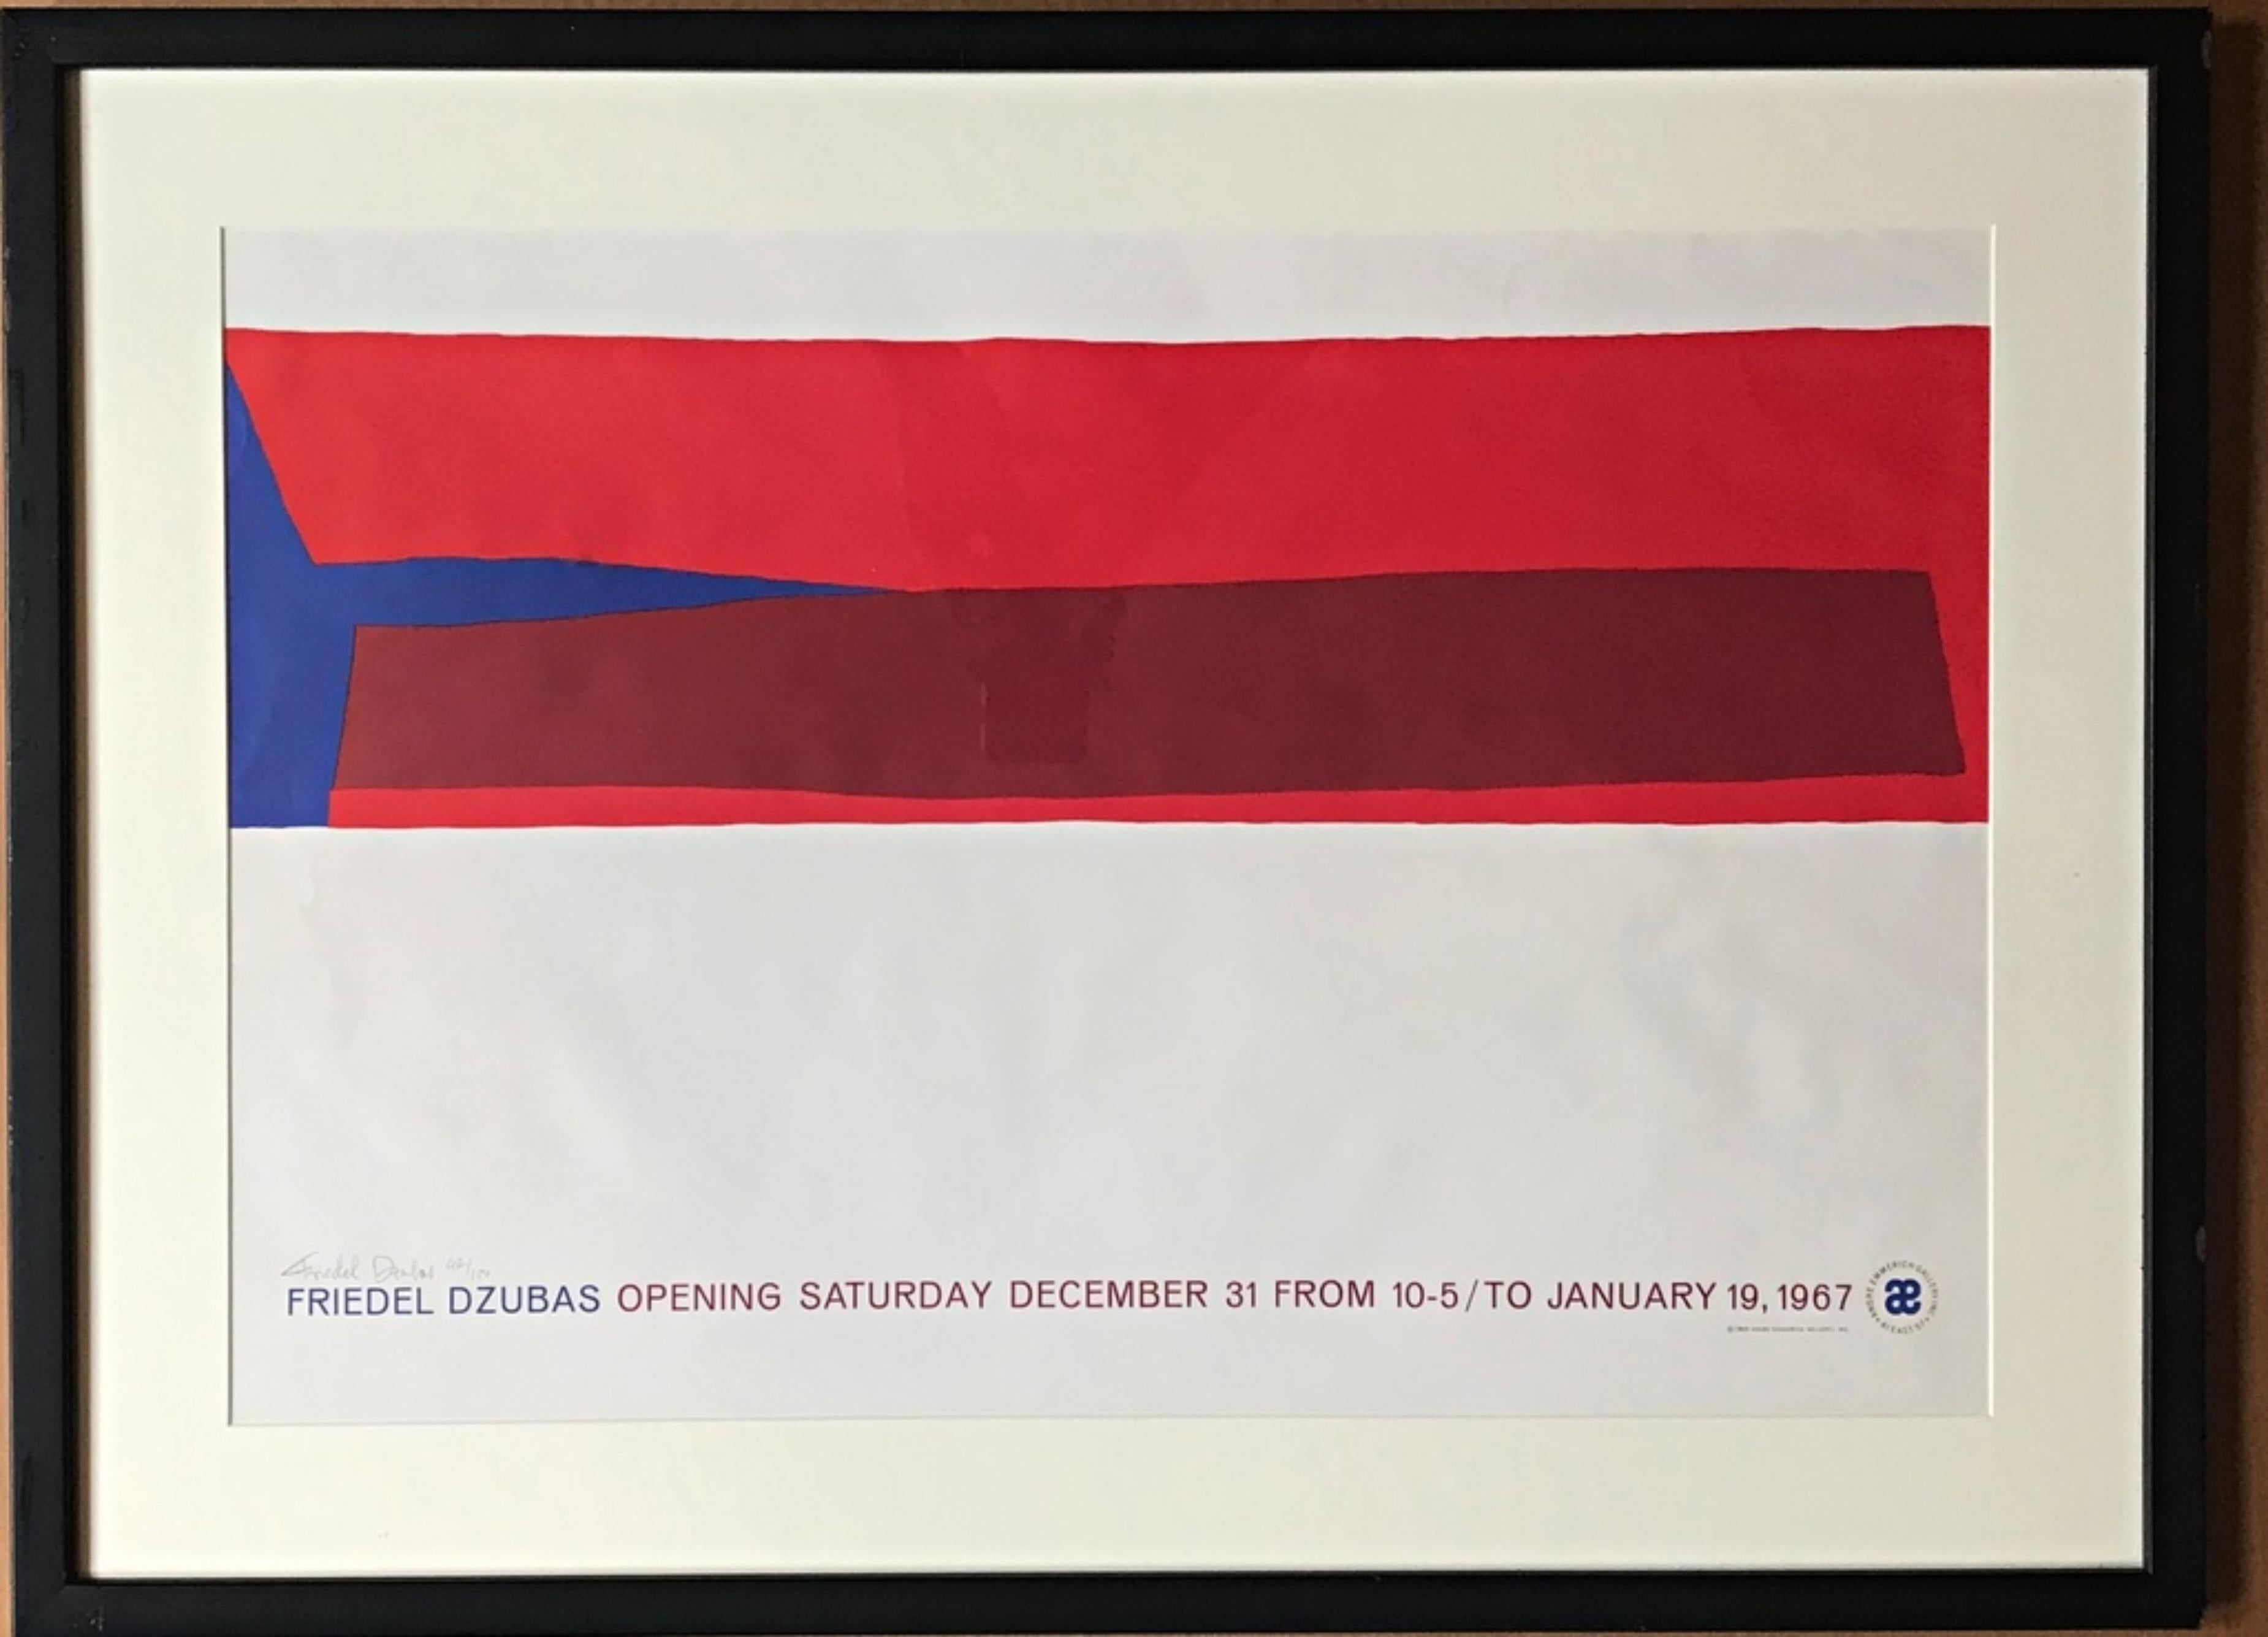 Friedel Dzubas Abstract Print - Hand signed and numbered Emmerich gallery exhibition poster, 1967